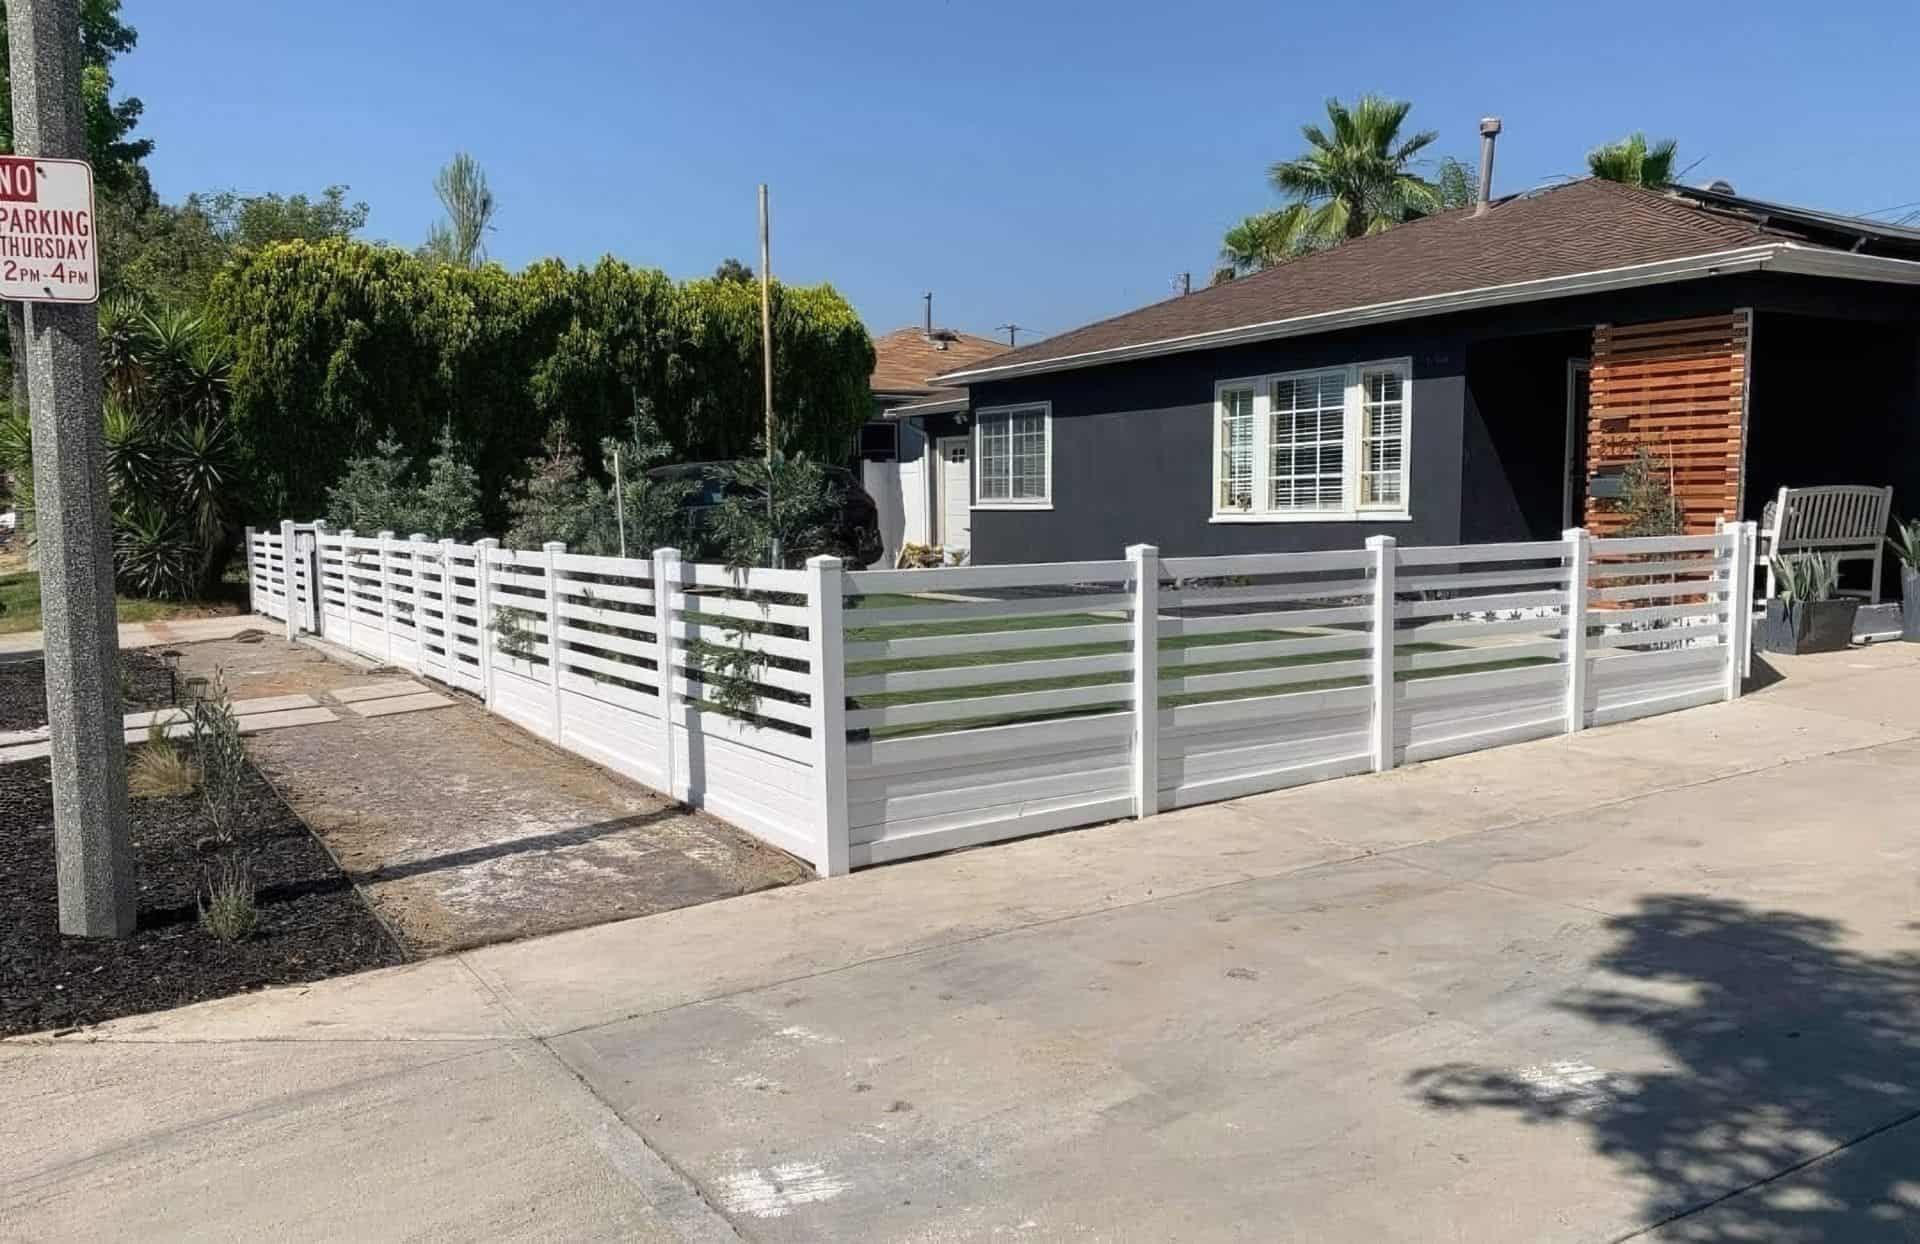 Vinyl horizontal picket fence lining concrete sidewalk & driveway, with lush front lawn & distant trees in background.